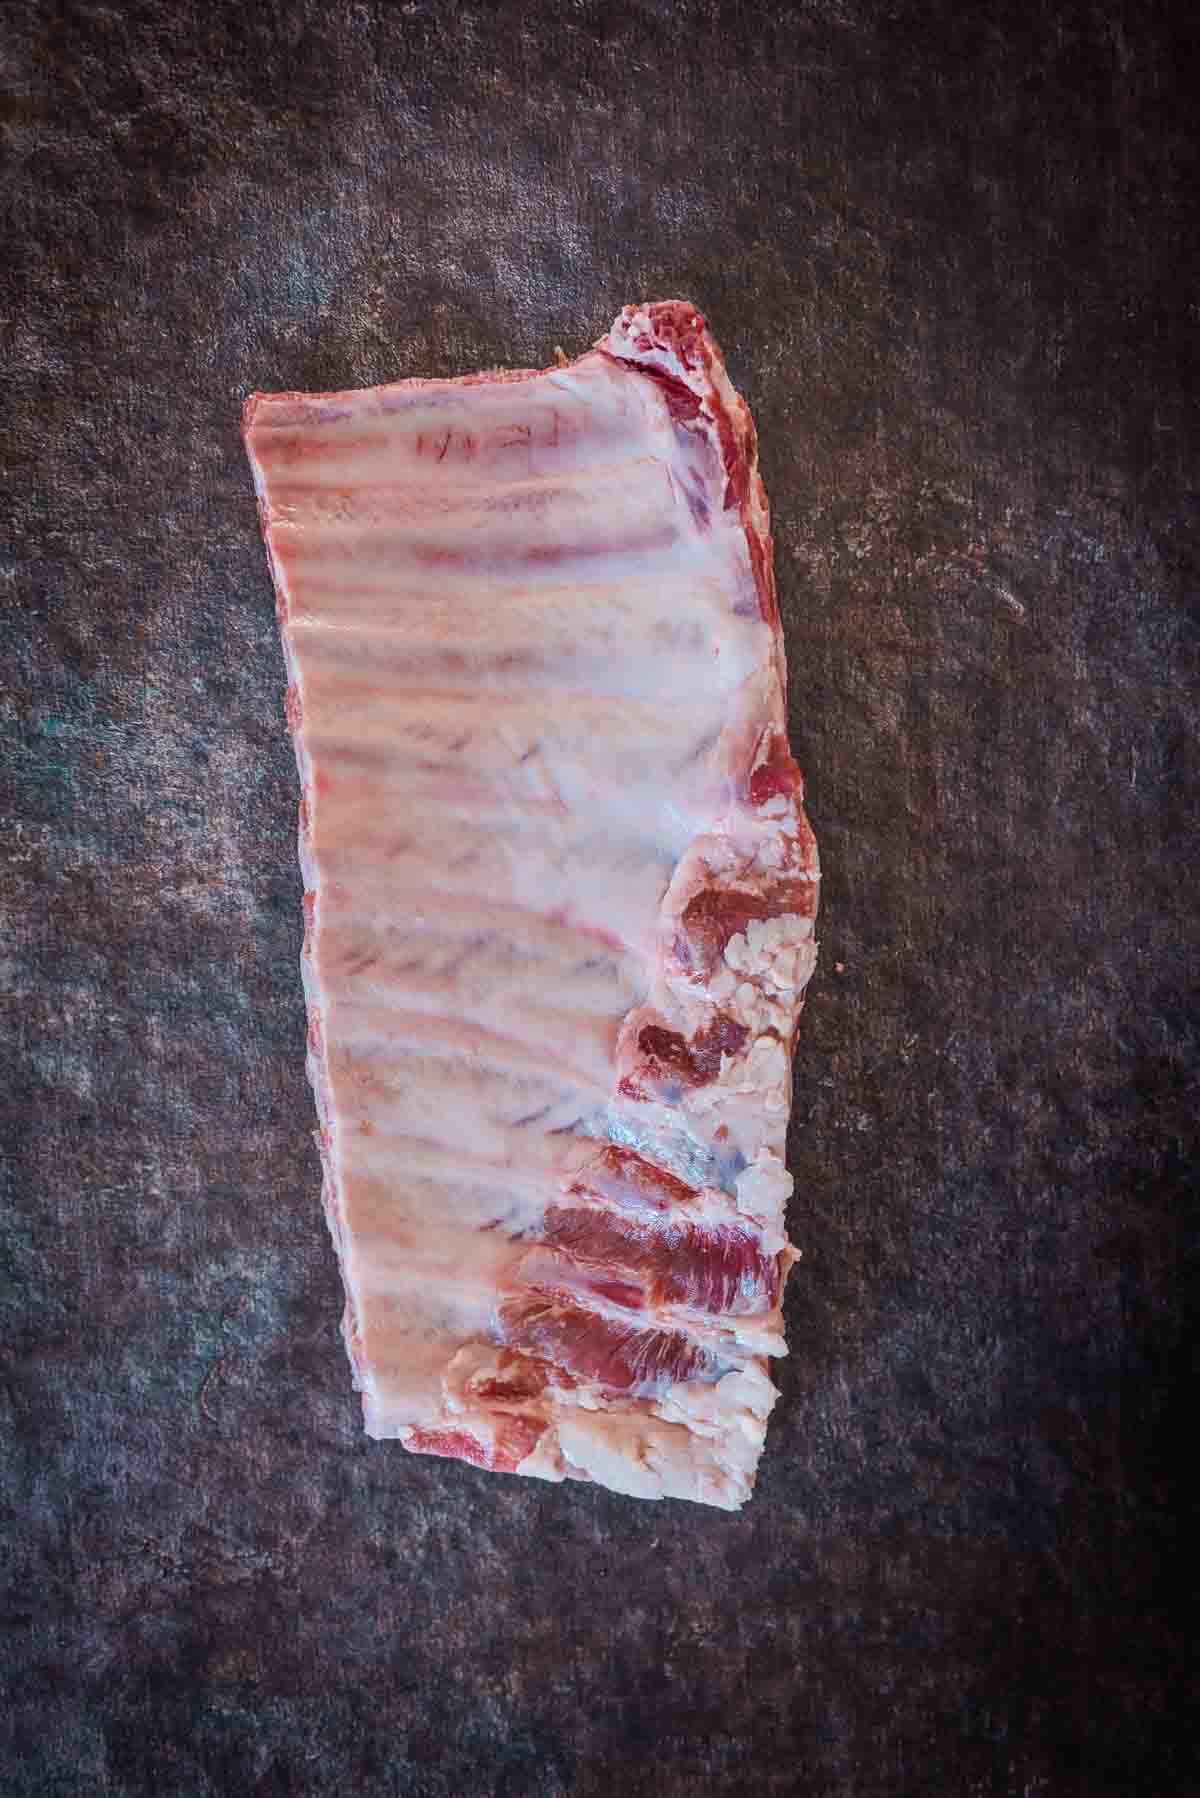 Bone side of a uniform rack of ribs showing the thing membrane.